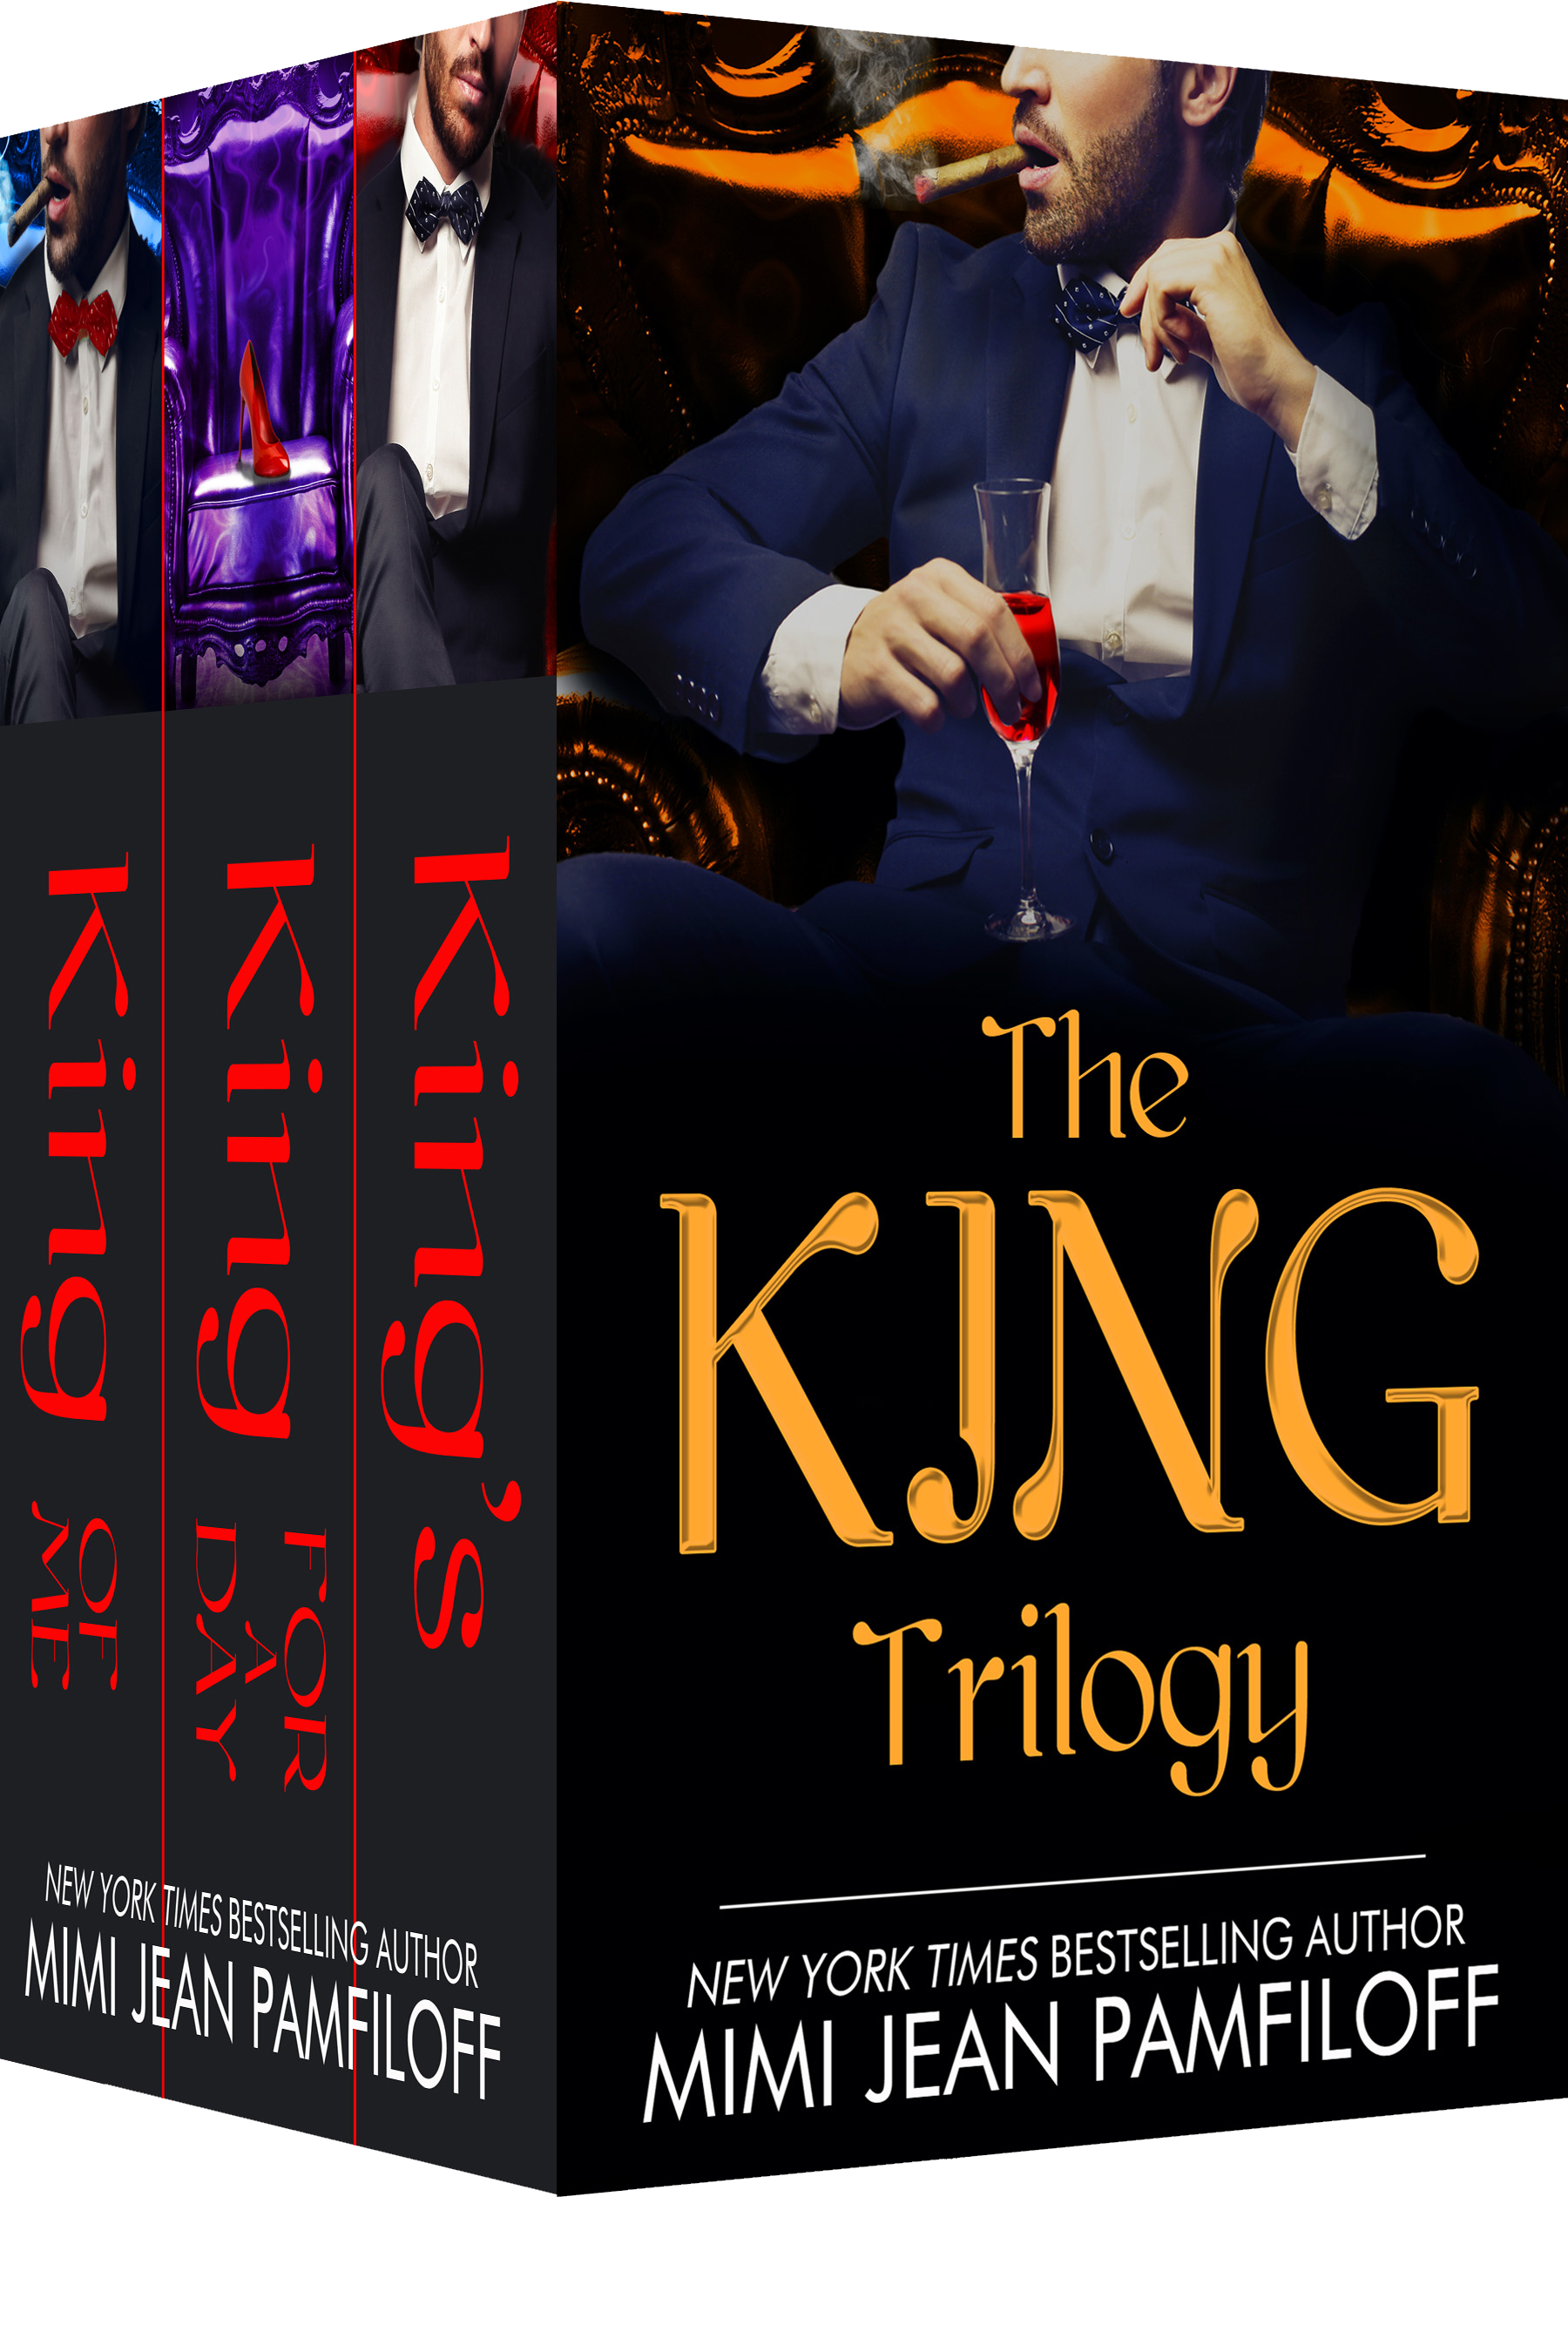 The King Triology